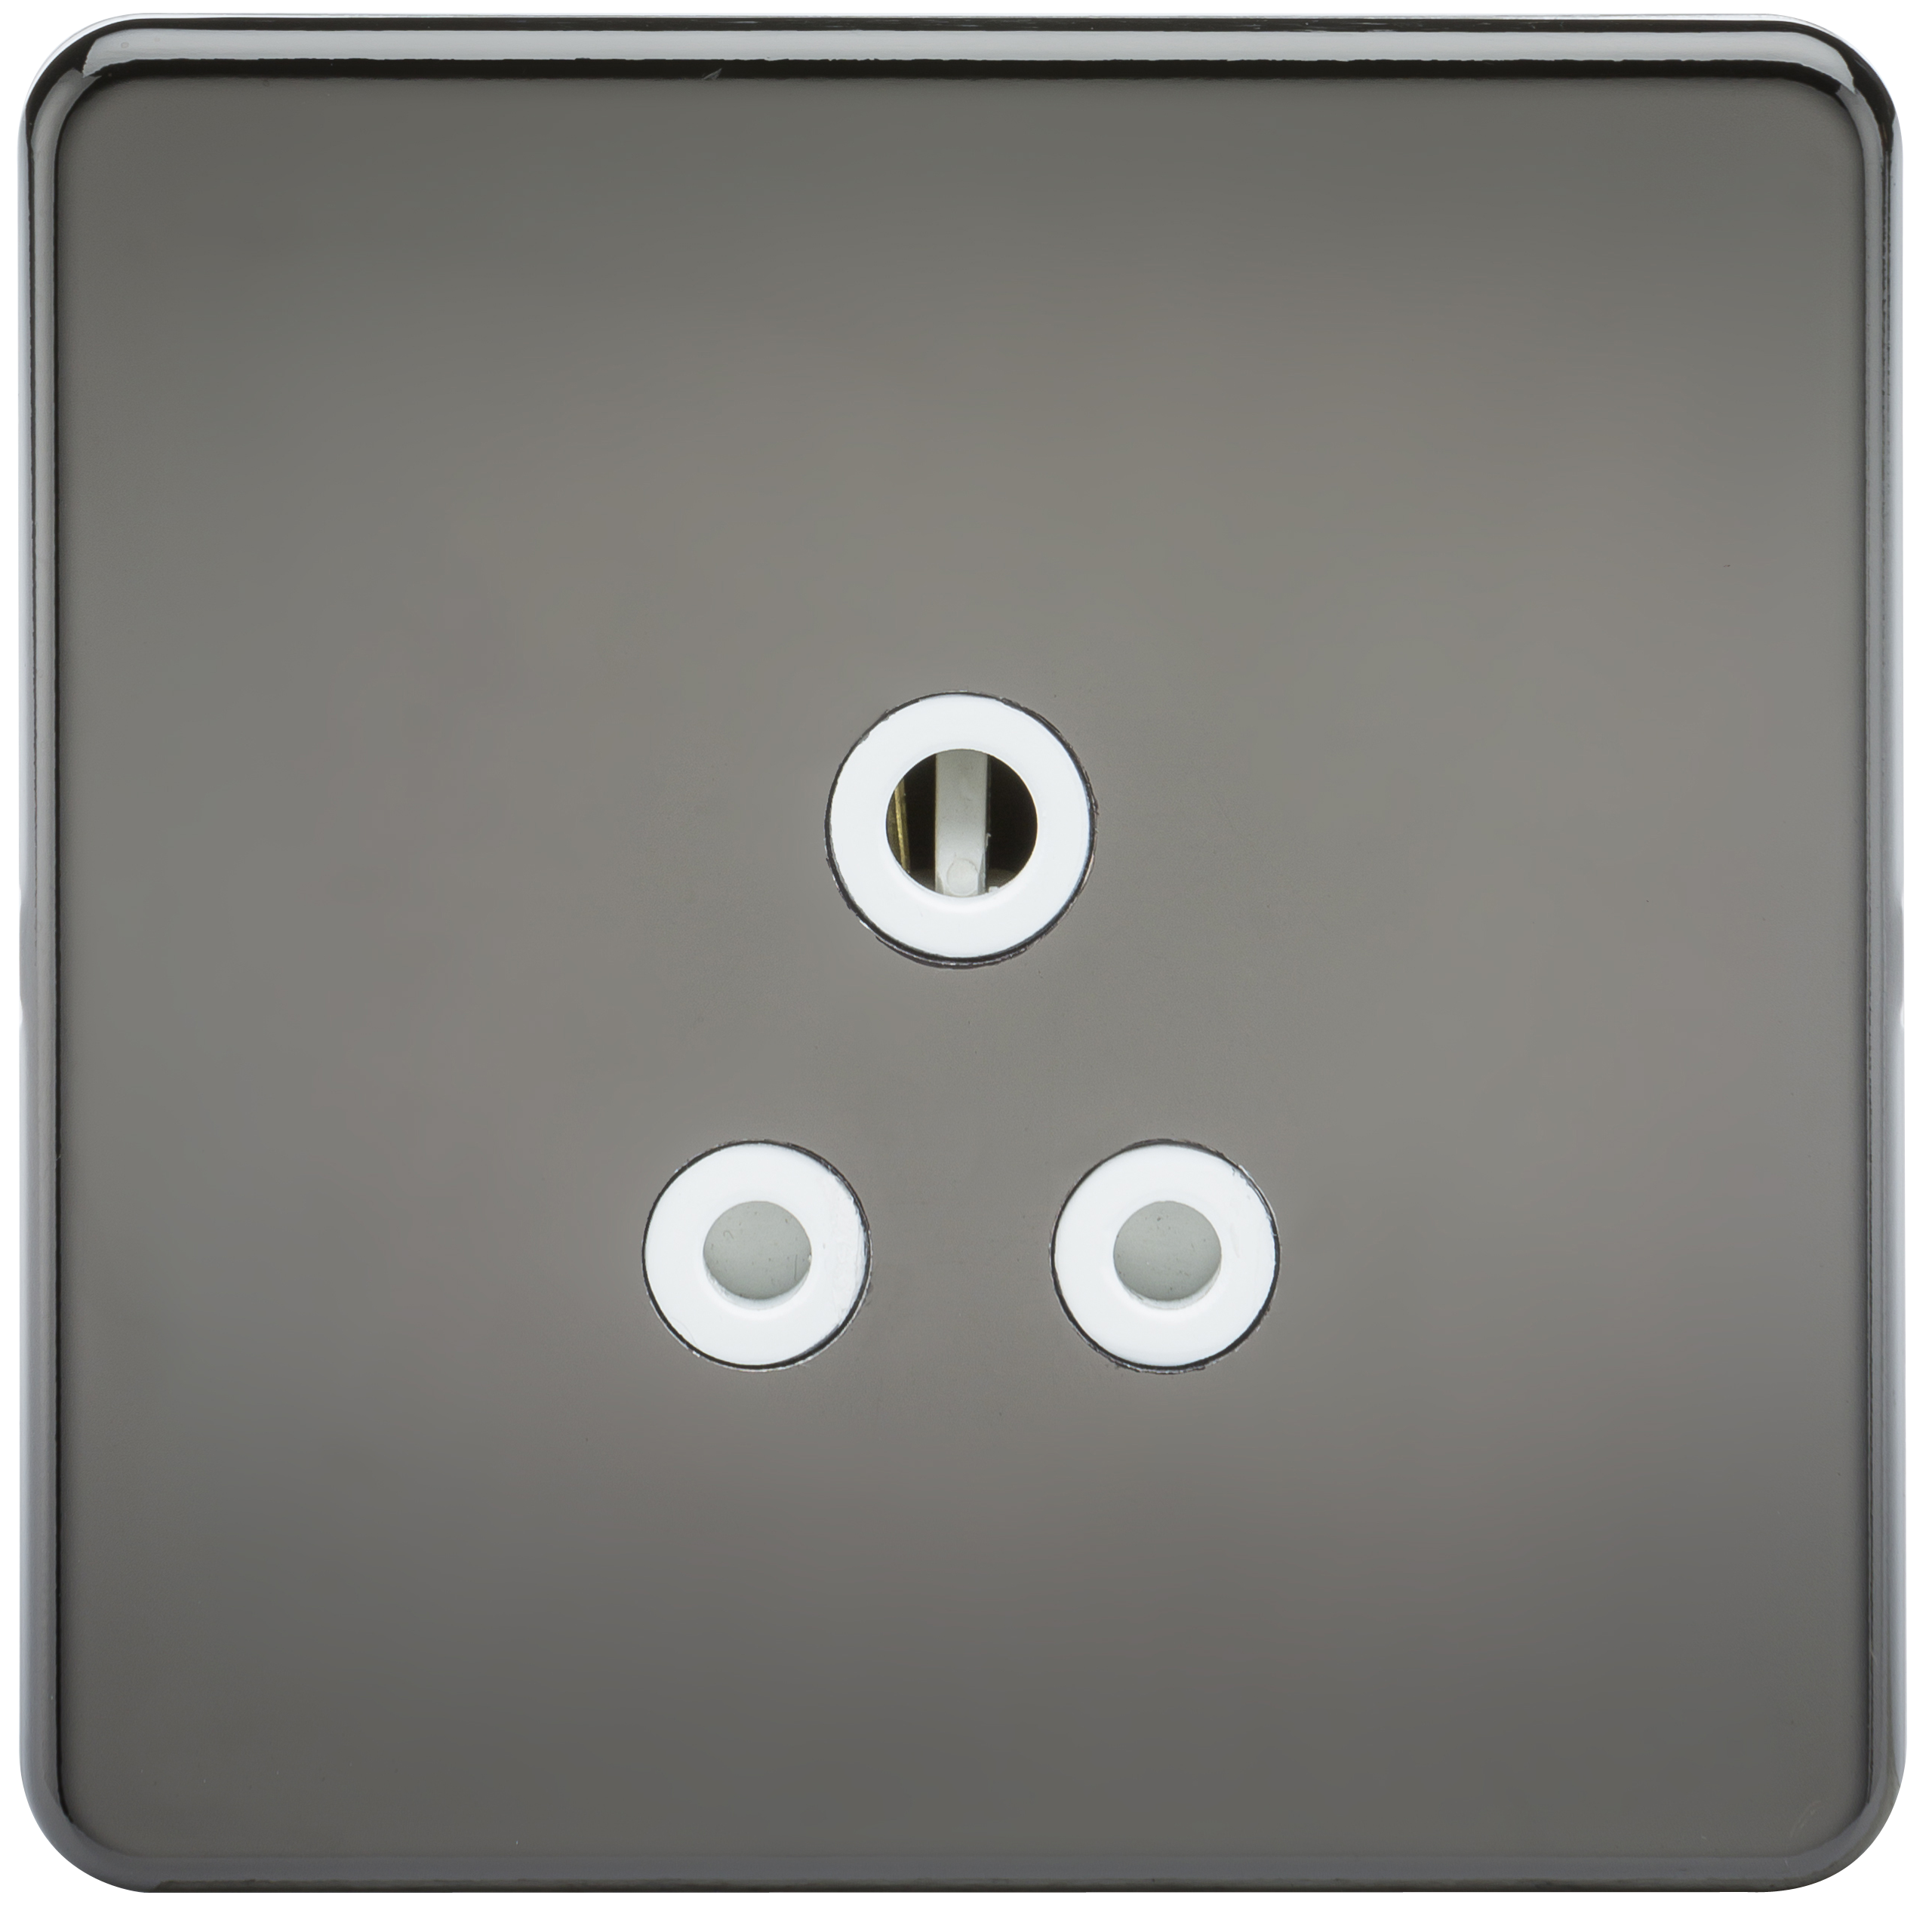 Screwless 5A Unswitched Socket - Black Nickel With White Insert - SF5ABNW 